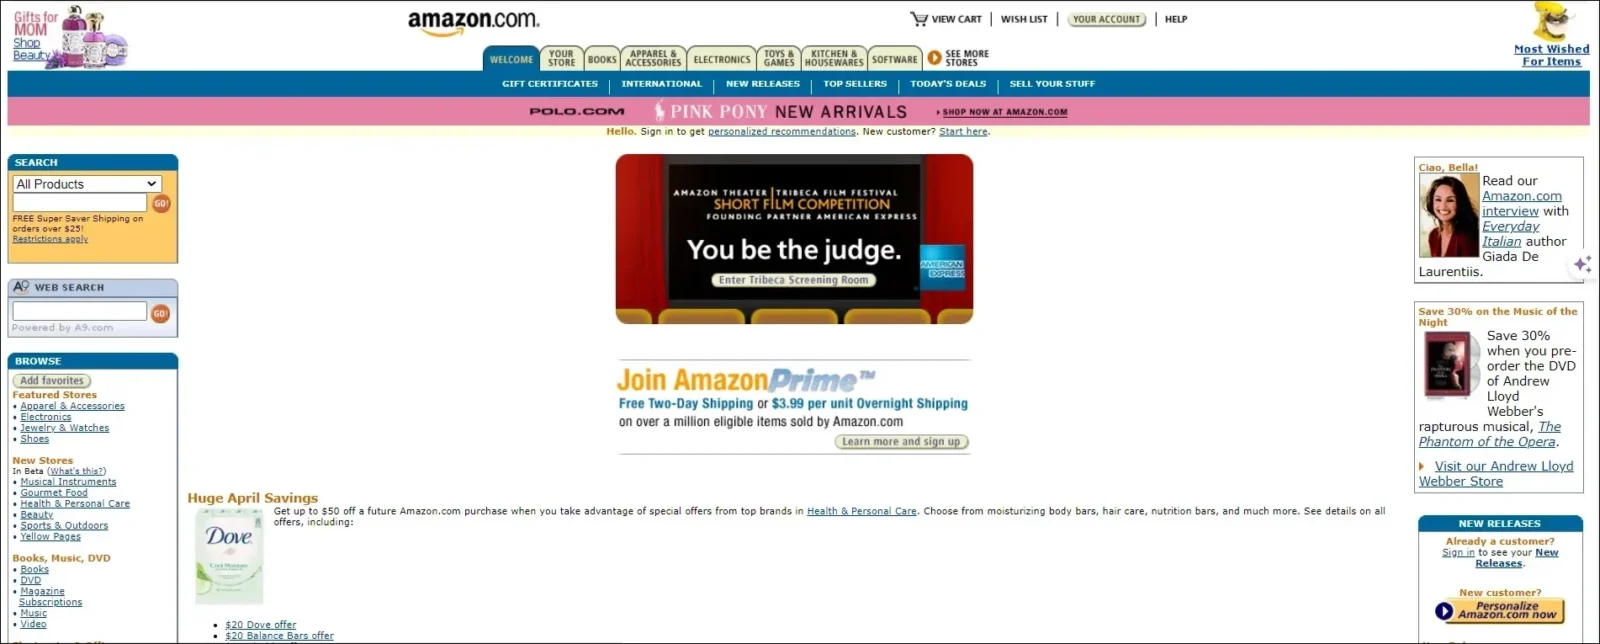 homepage of amazon in 2005